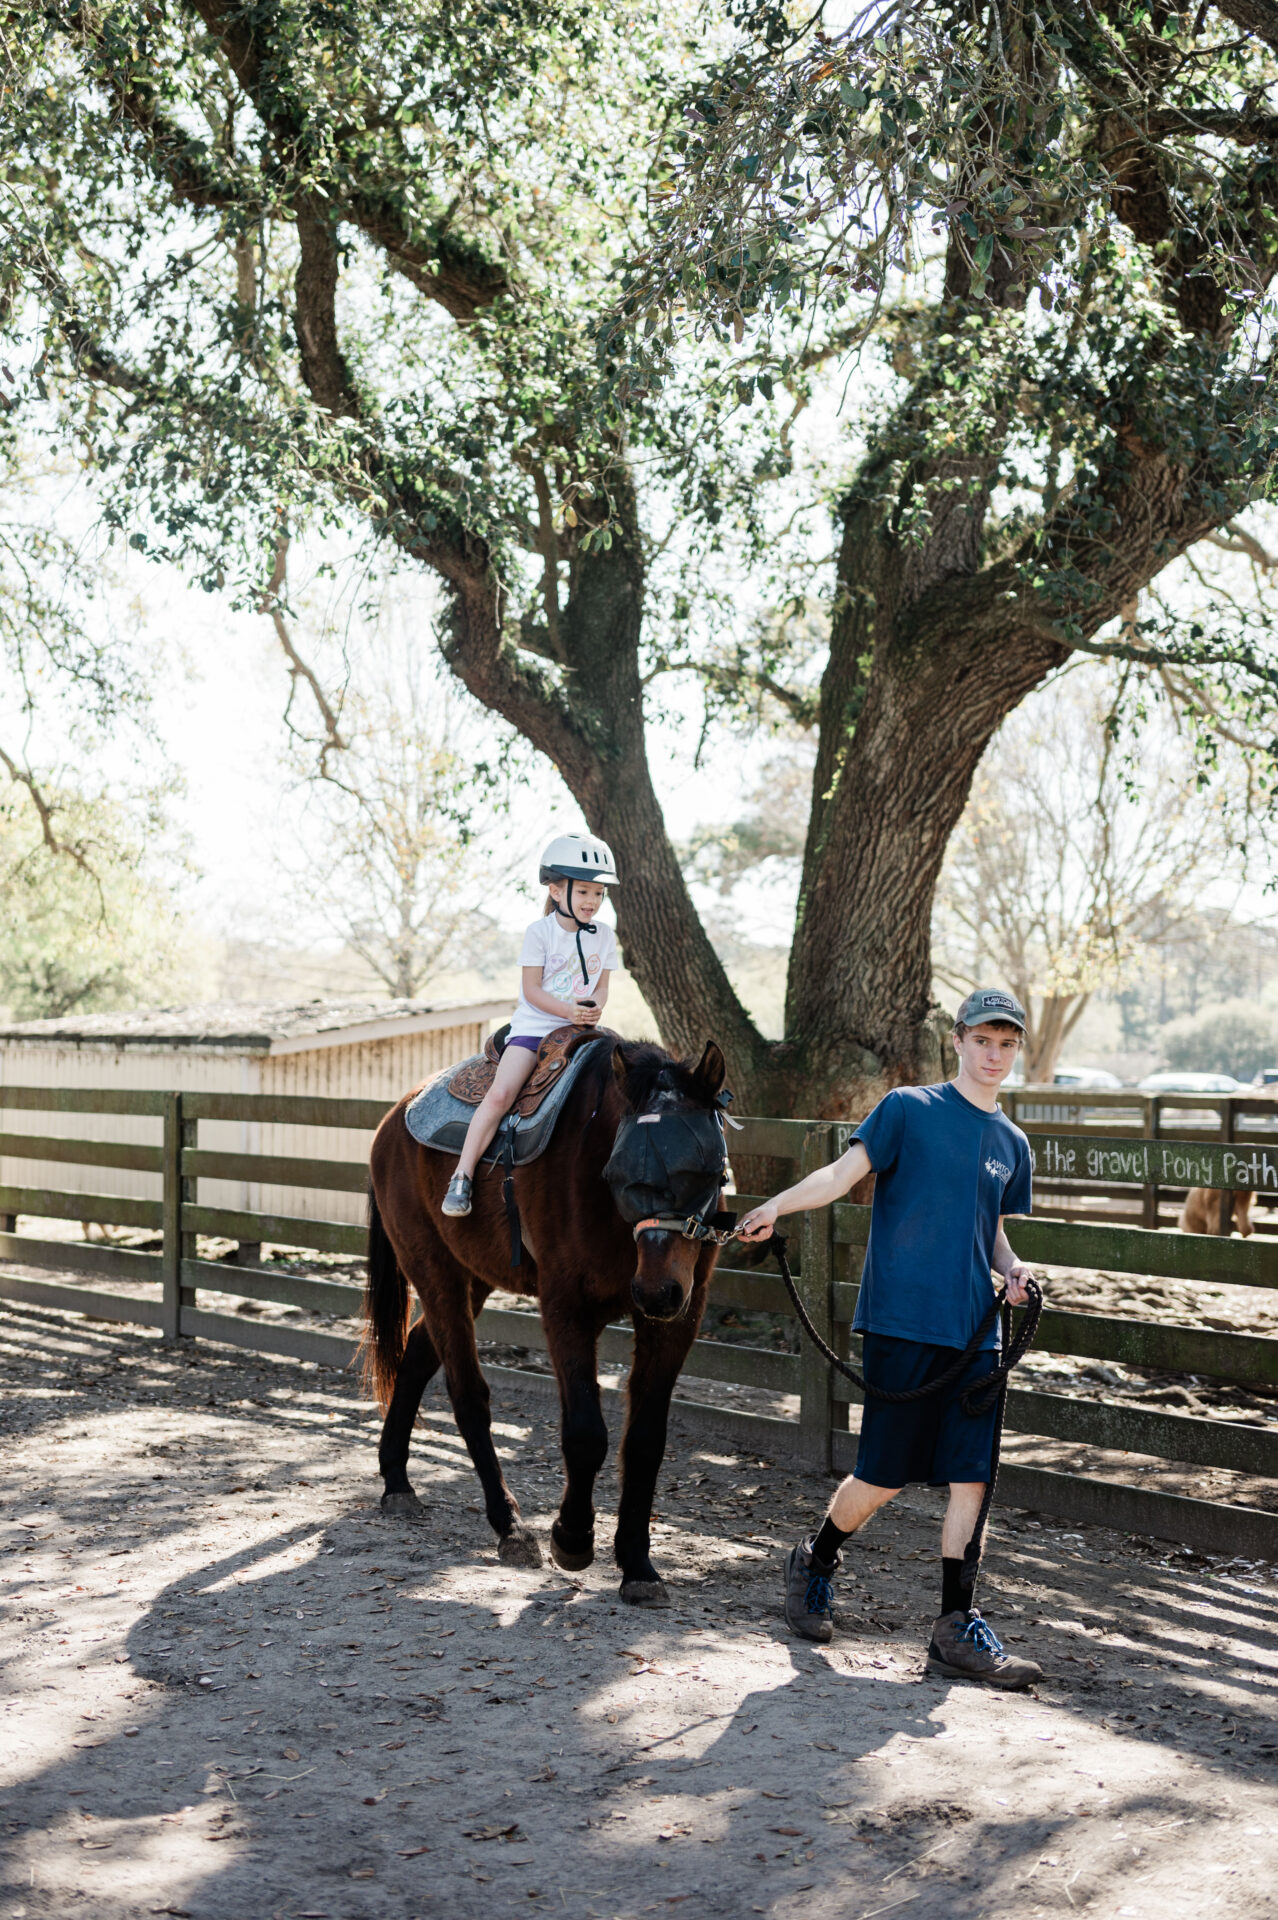 Emma riding brown horse as someone guides with the reigns at Lawton Stables in Hilton Head--Hilton Head family friendly activities